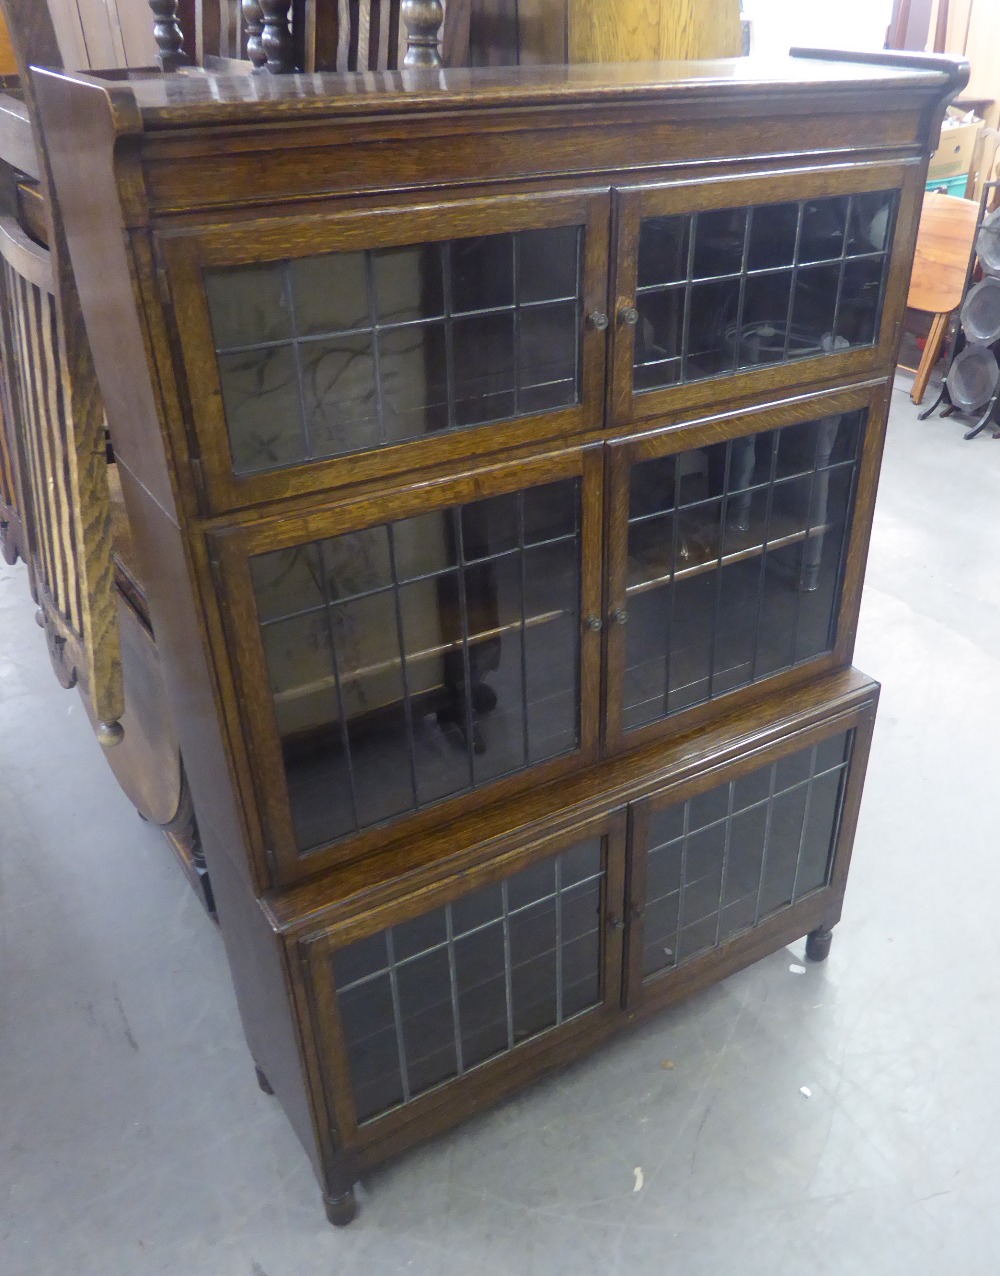 AN EARLY TWENTIETH CENTURY 'MINTY' OAK THREE SECTION BOOKCASE WITH LEADED DOORS